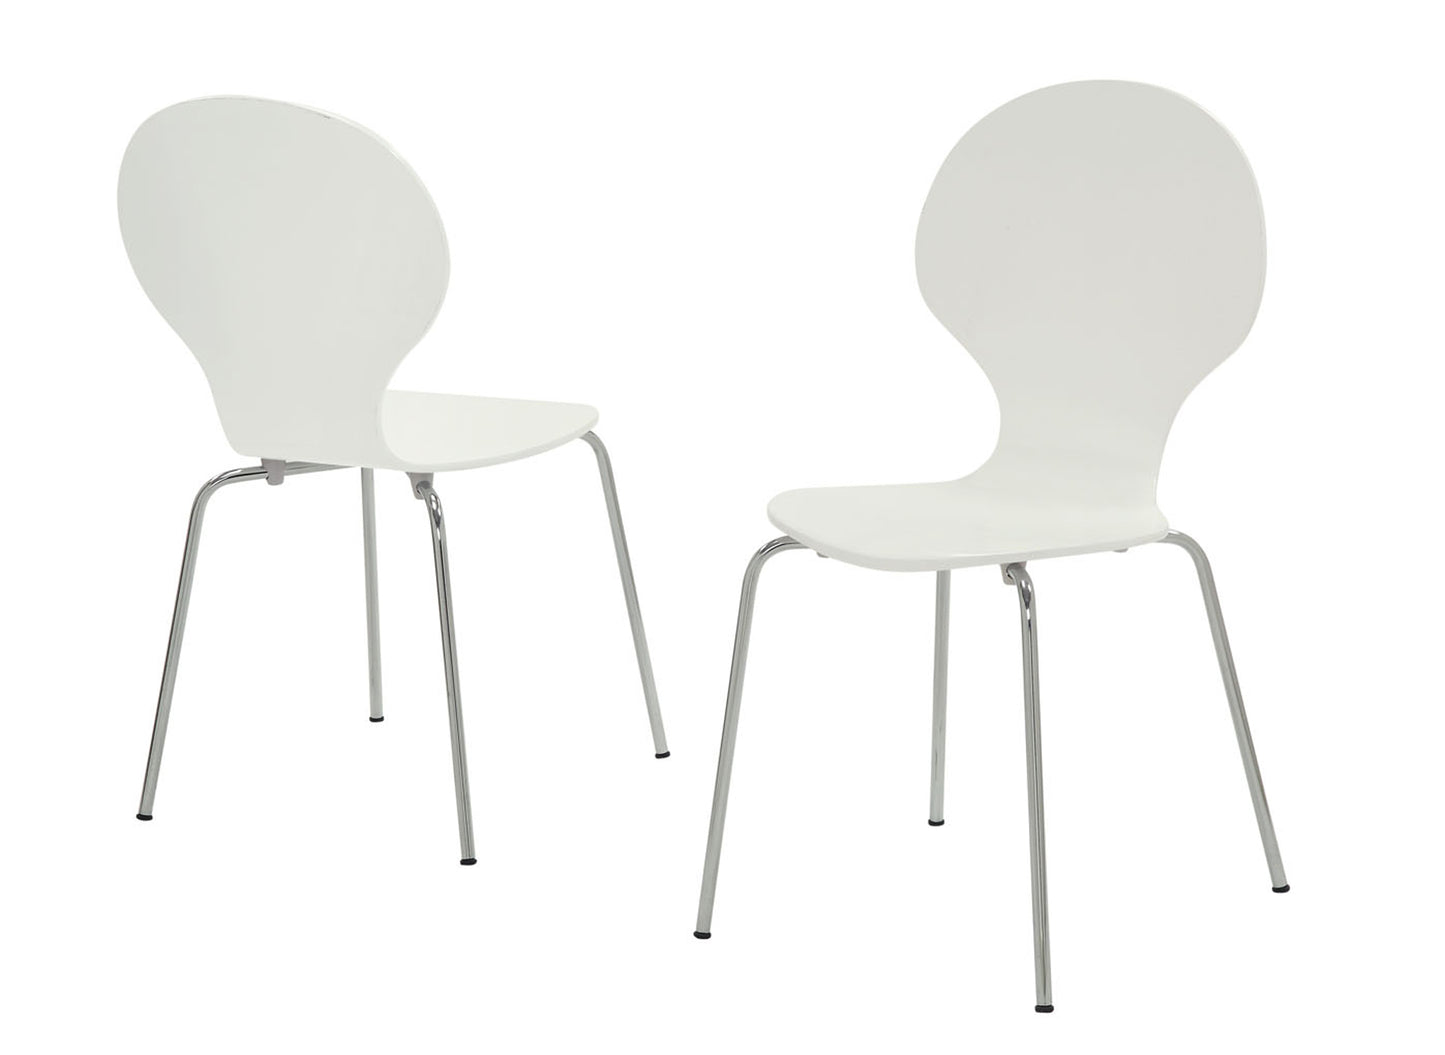 63.75" x 53.25" x 102" White Metal 4 Dining Chairs